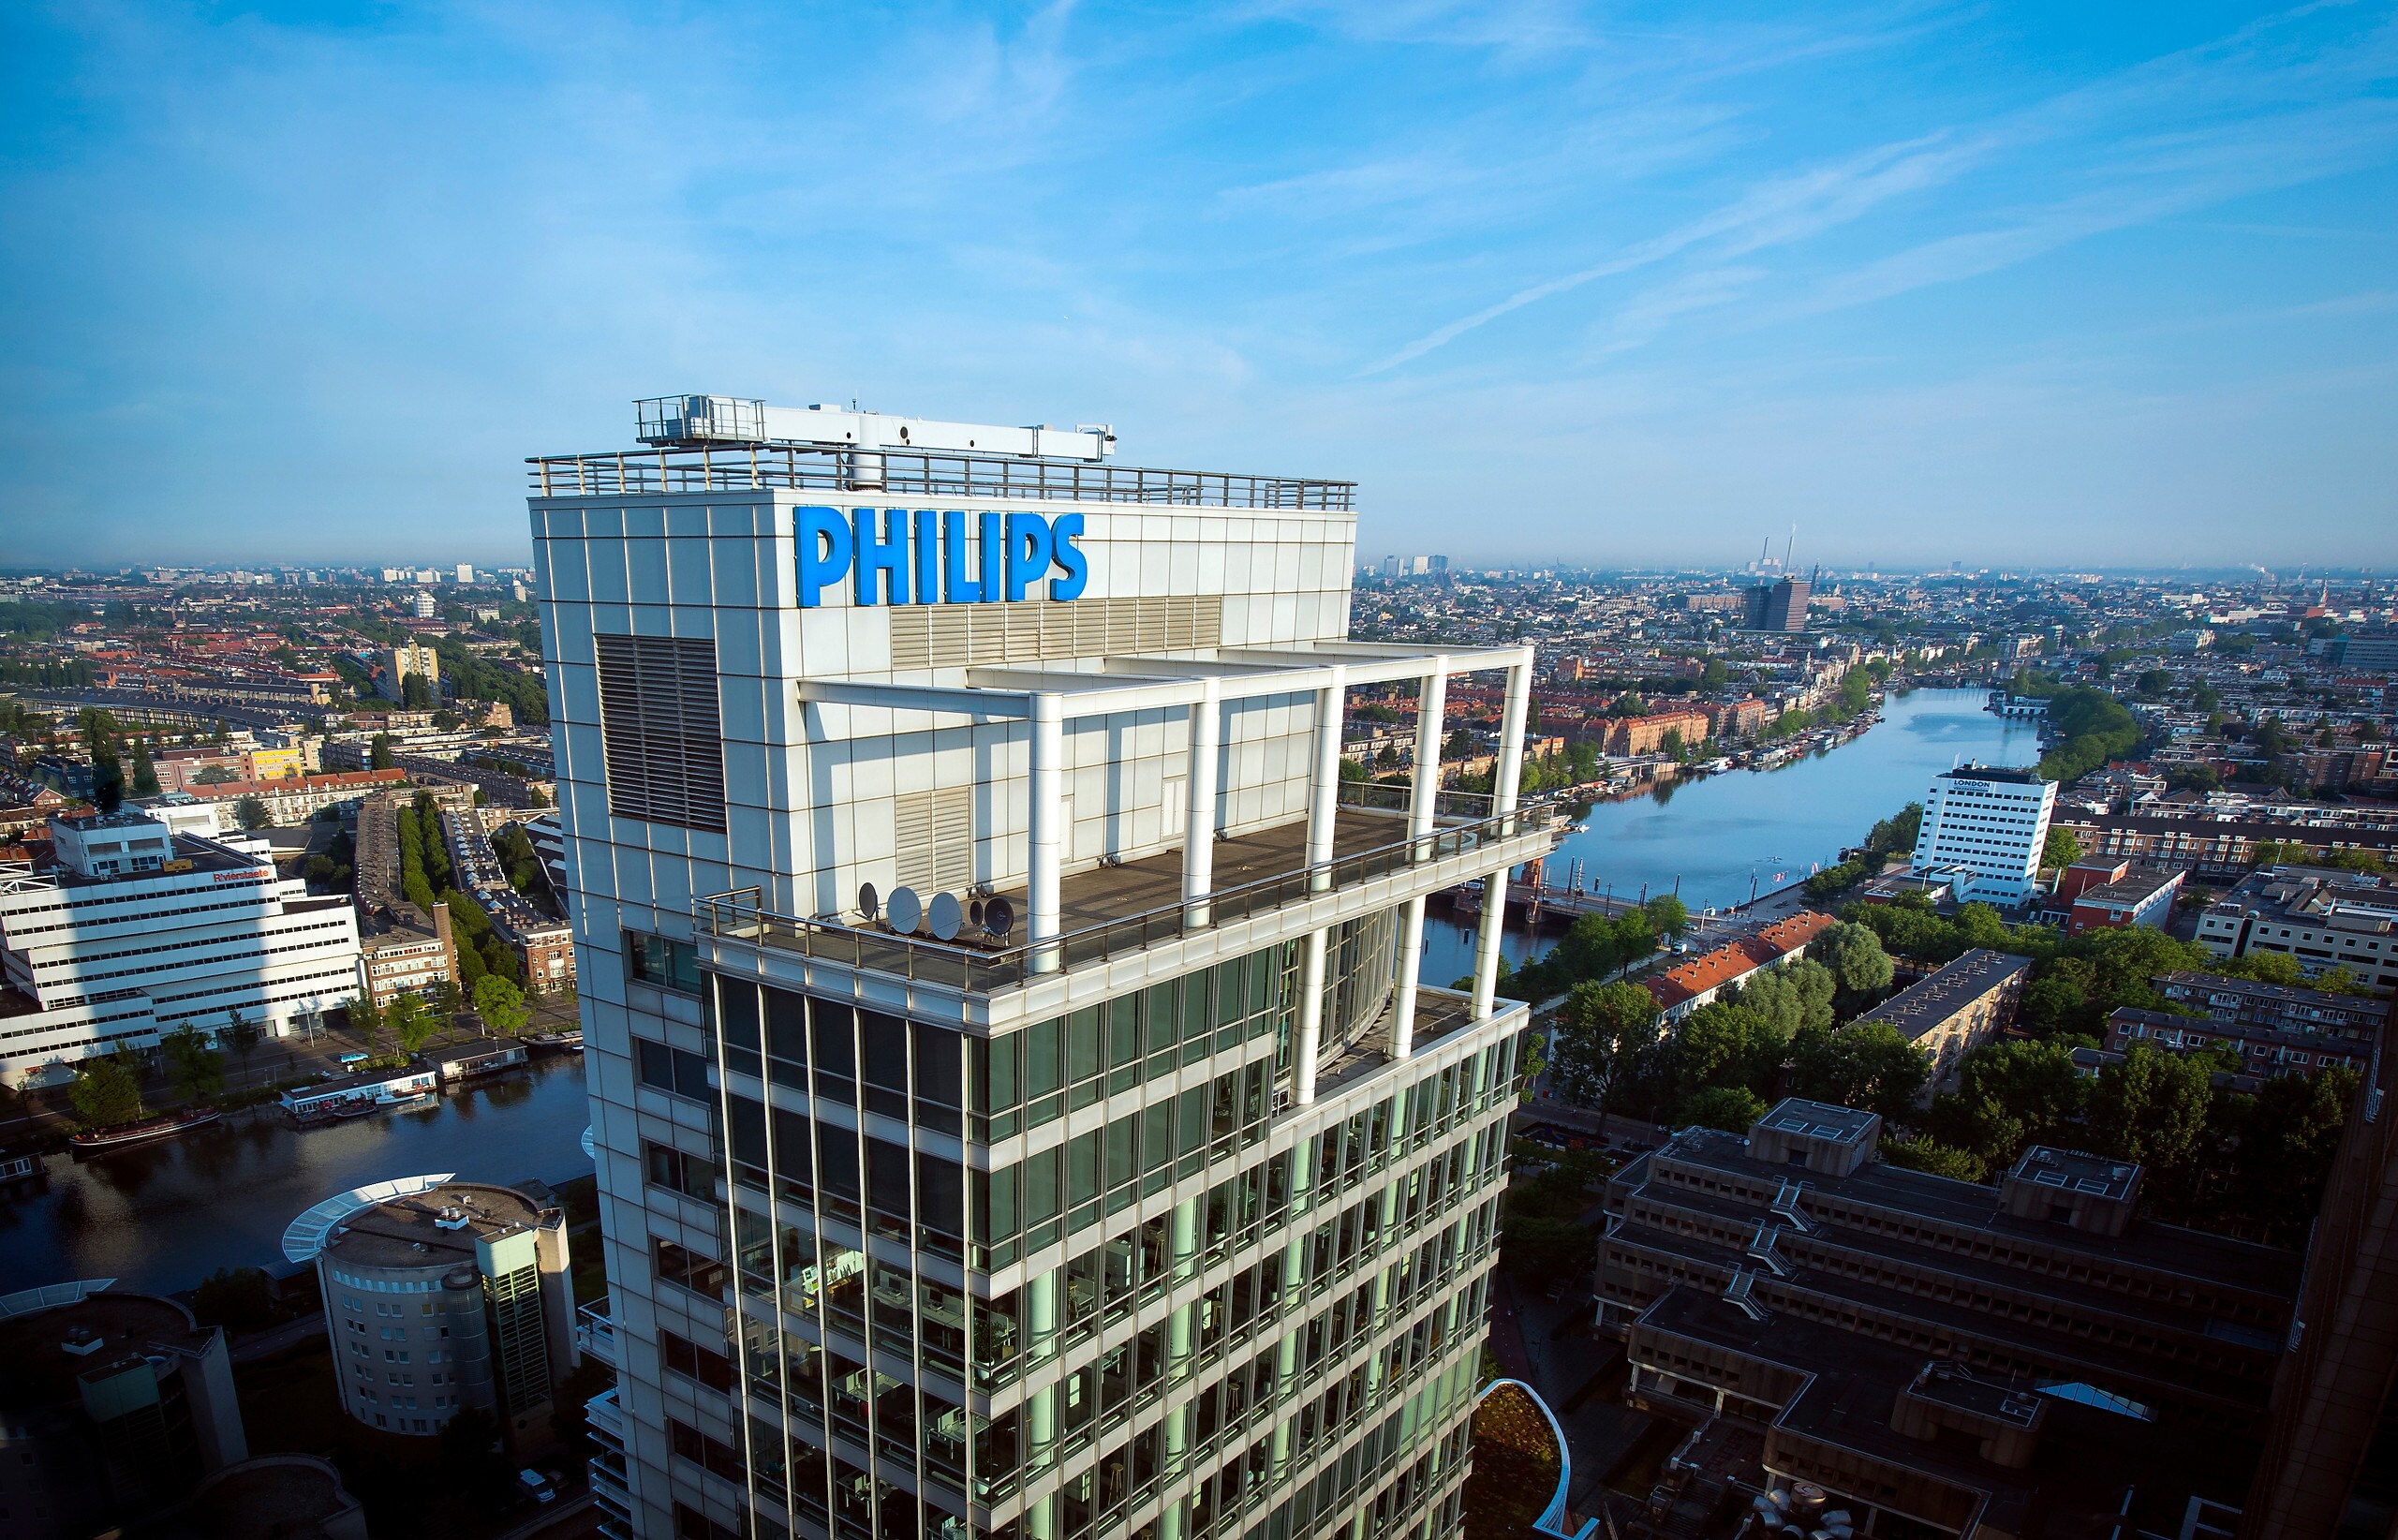 Download image (.jpg) Philips Headquarters Amsterdam (opens in a new window)